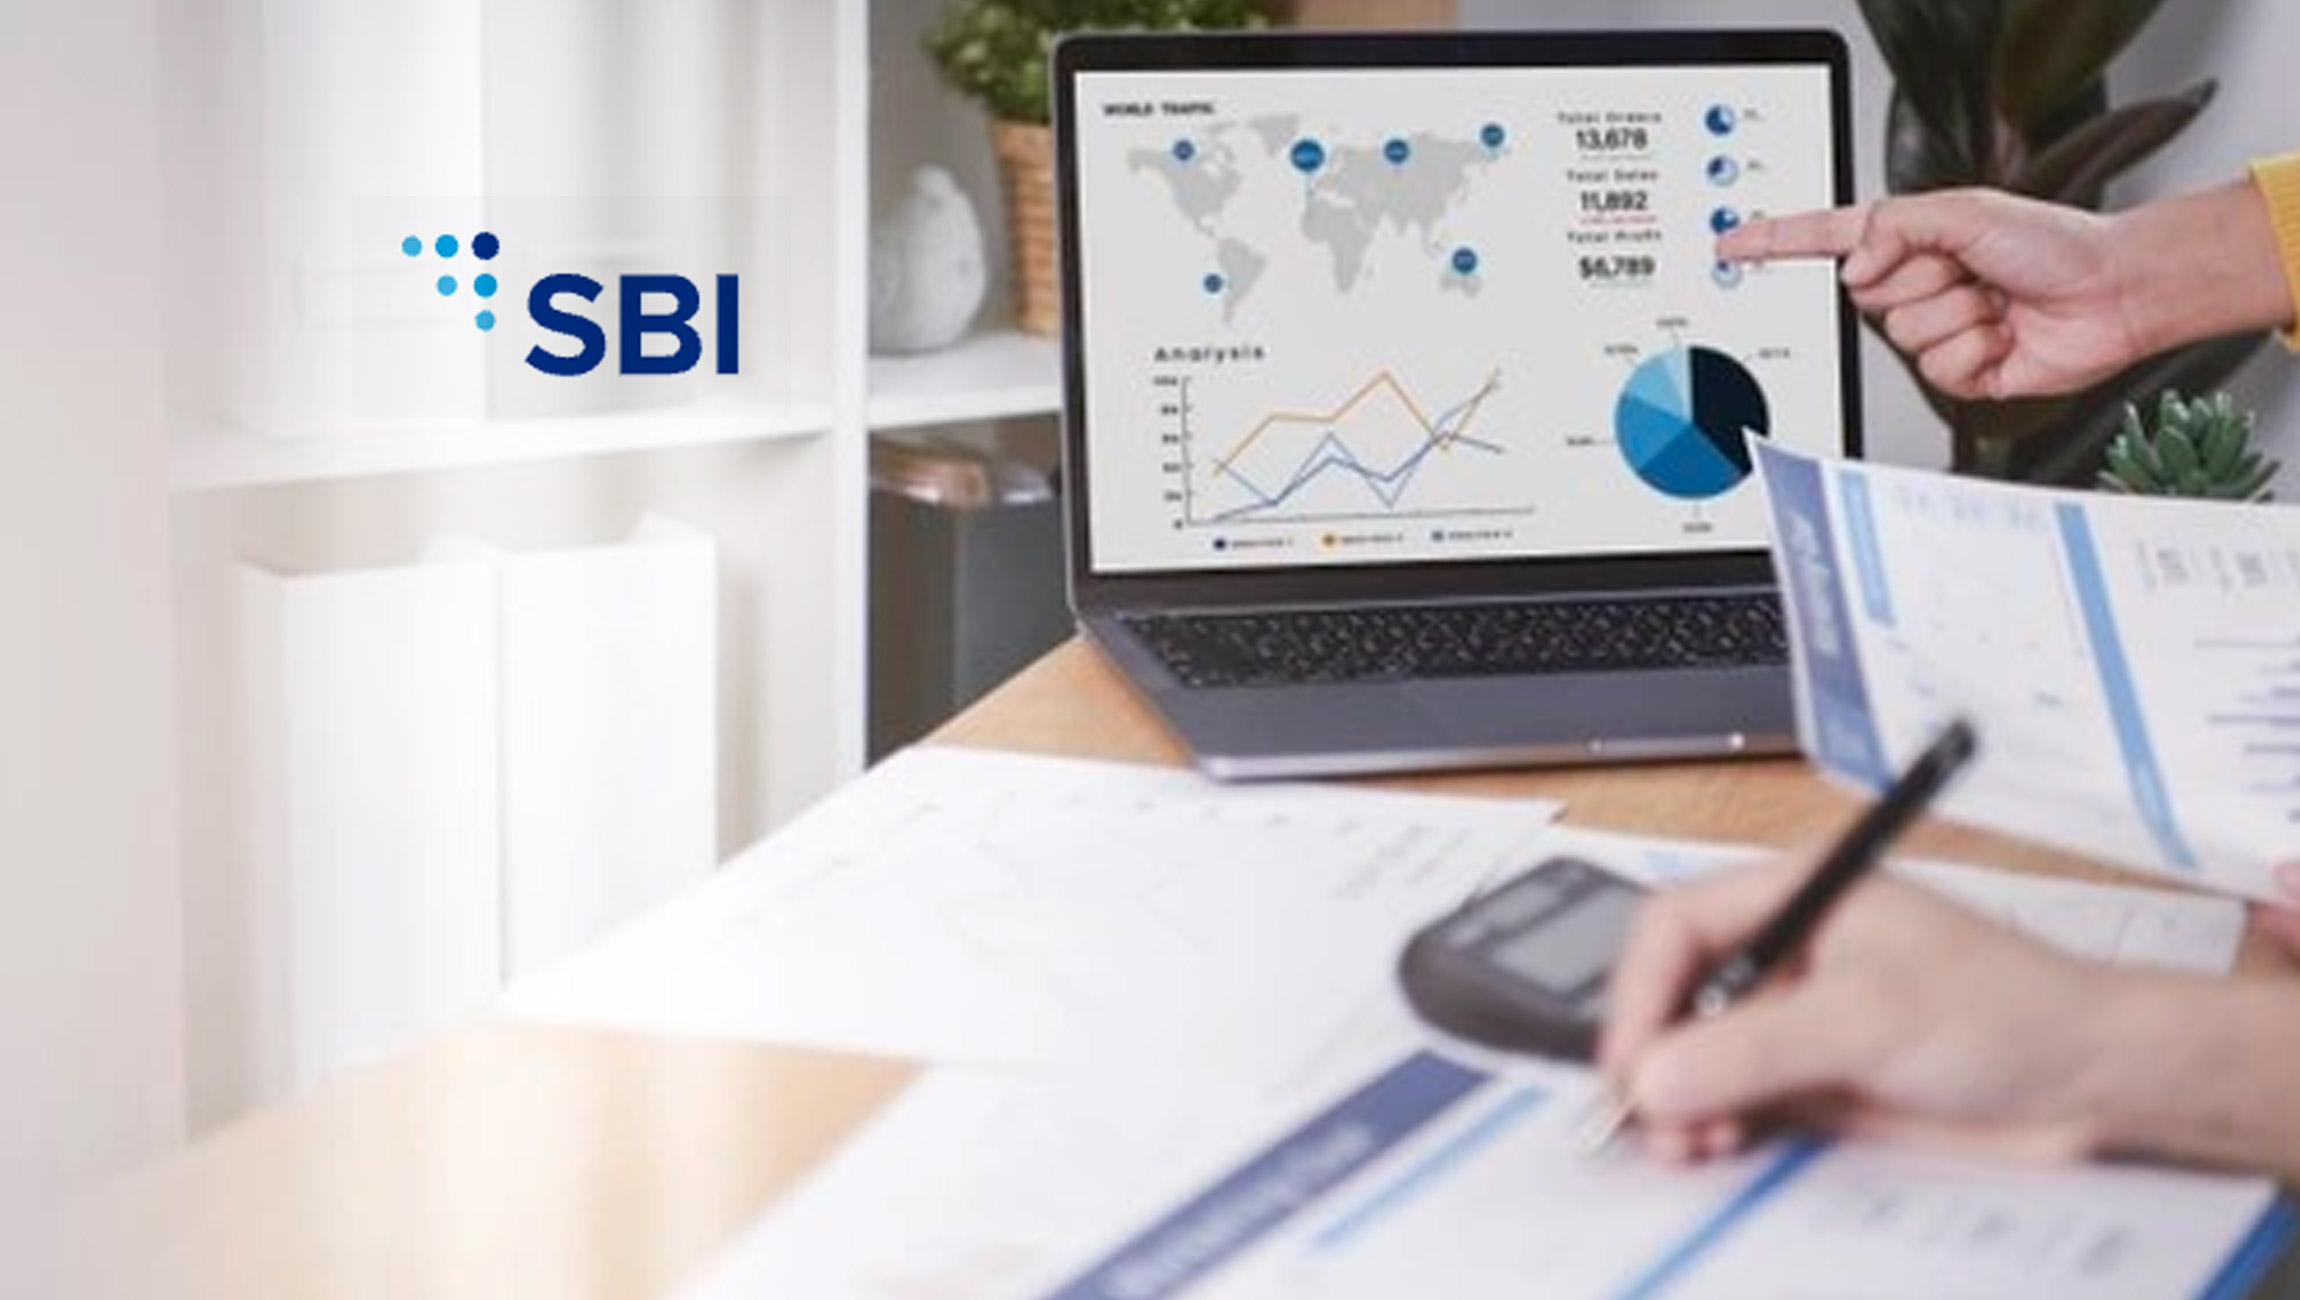 Private-Equity-and-Enterprise-Businesses-Tap-SBI-for-Growth-Advisory-Services